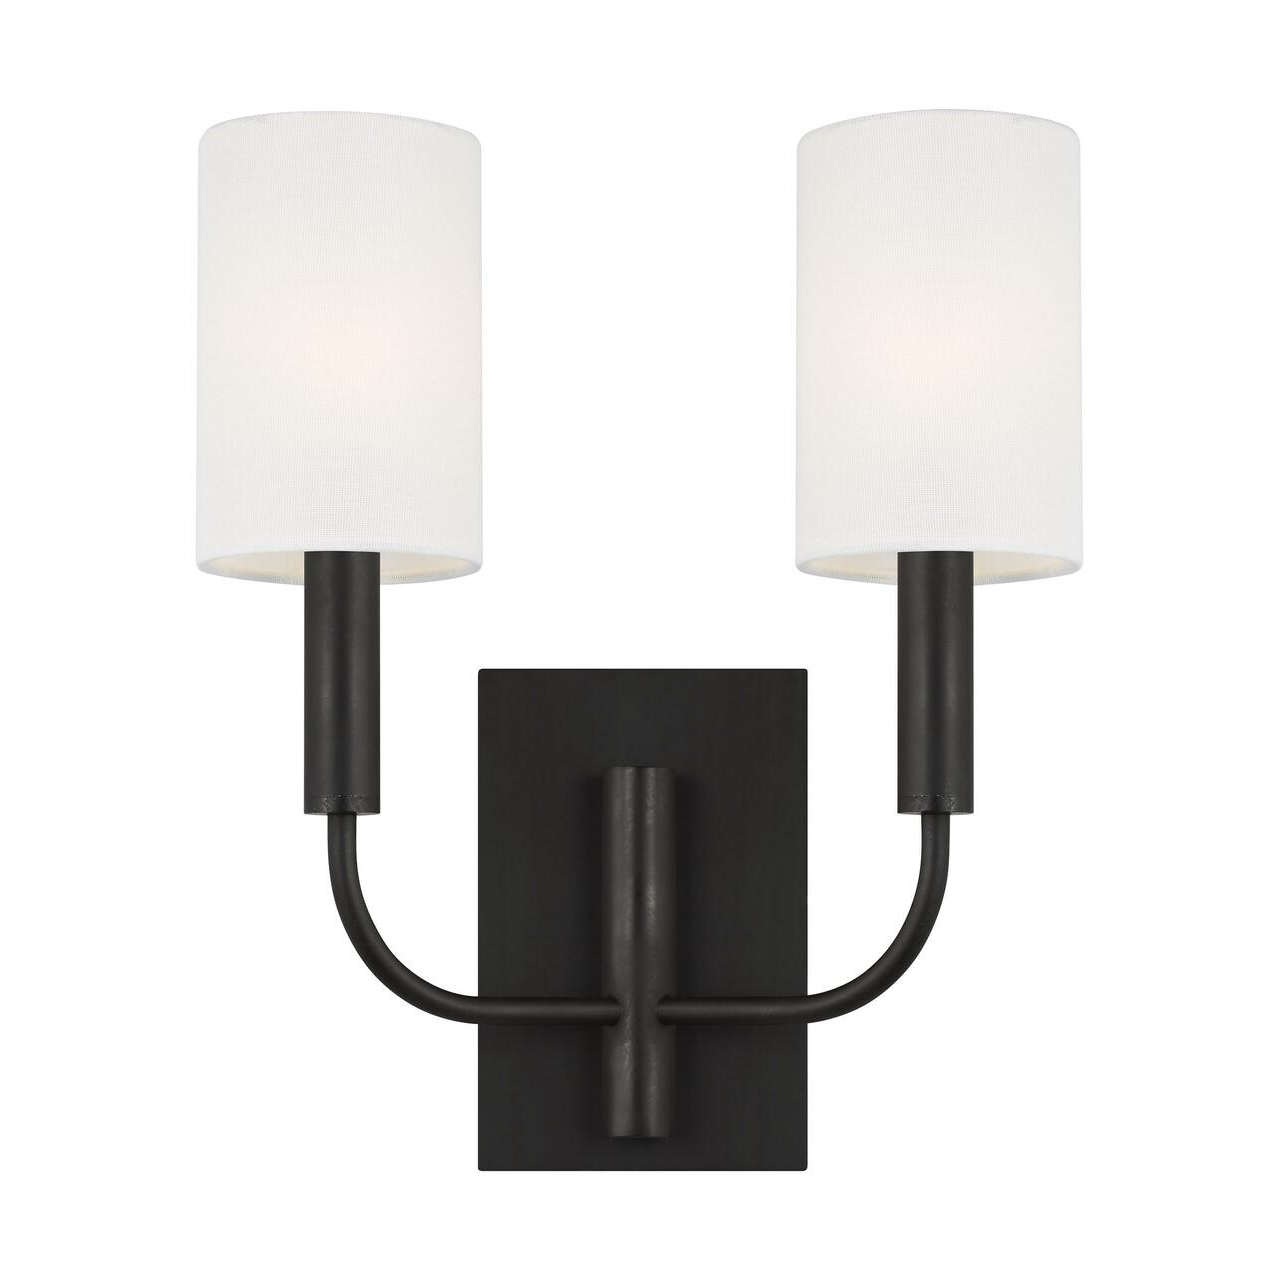 Product Image of Brianna Aged Iron Twin Wall Light with Linen Shade